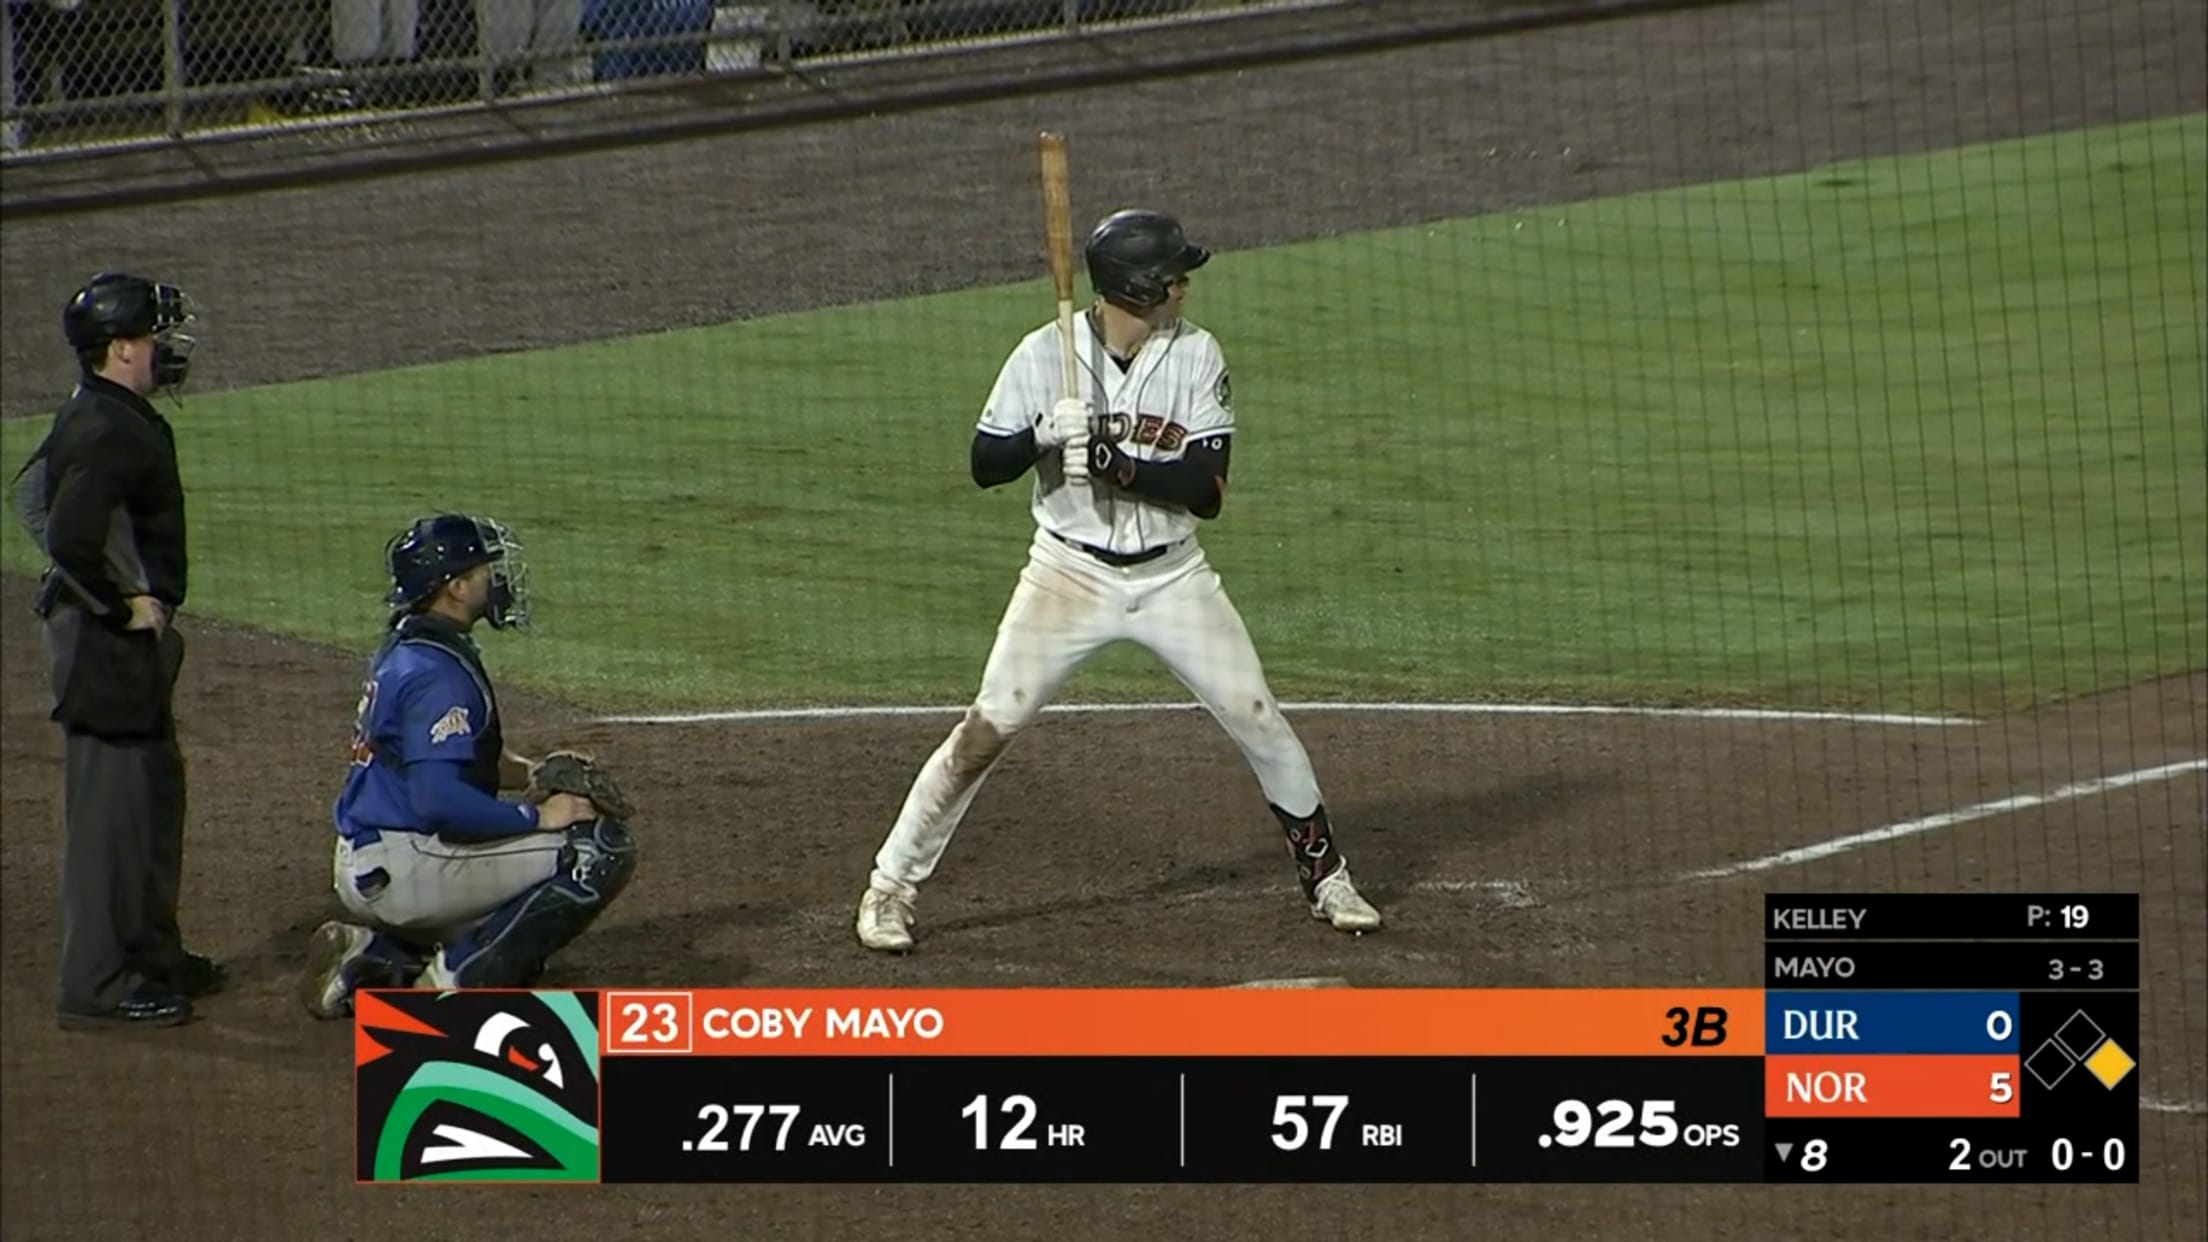 Coby Mayo's four-hit game